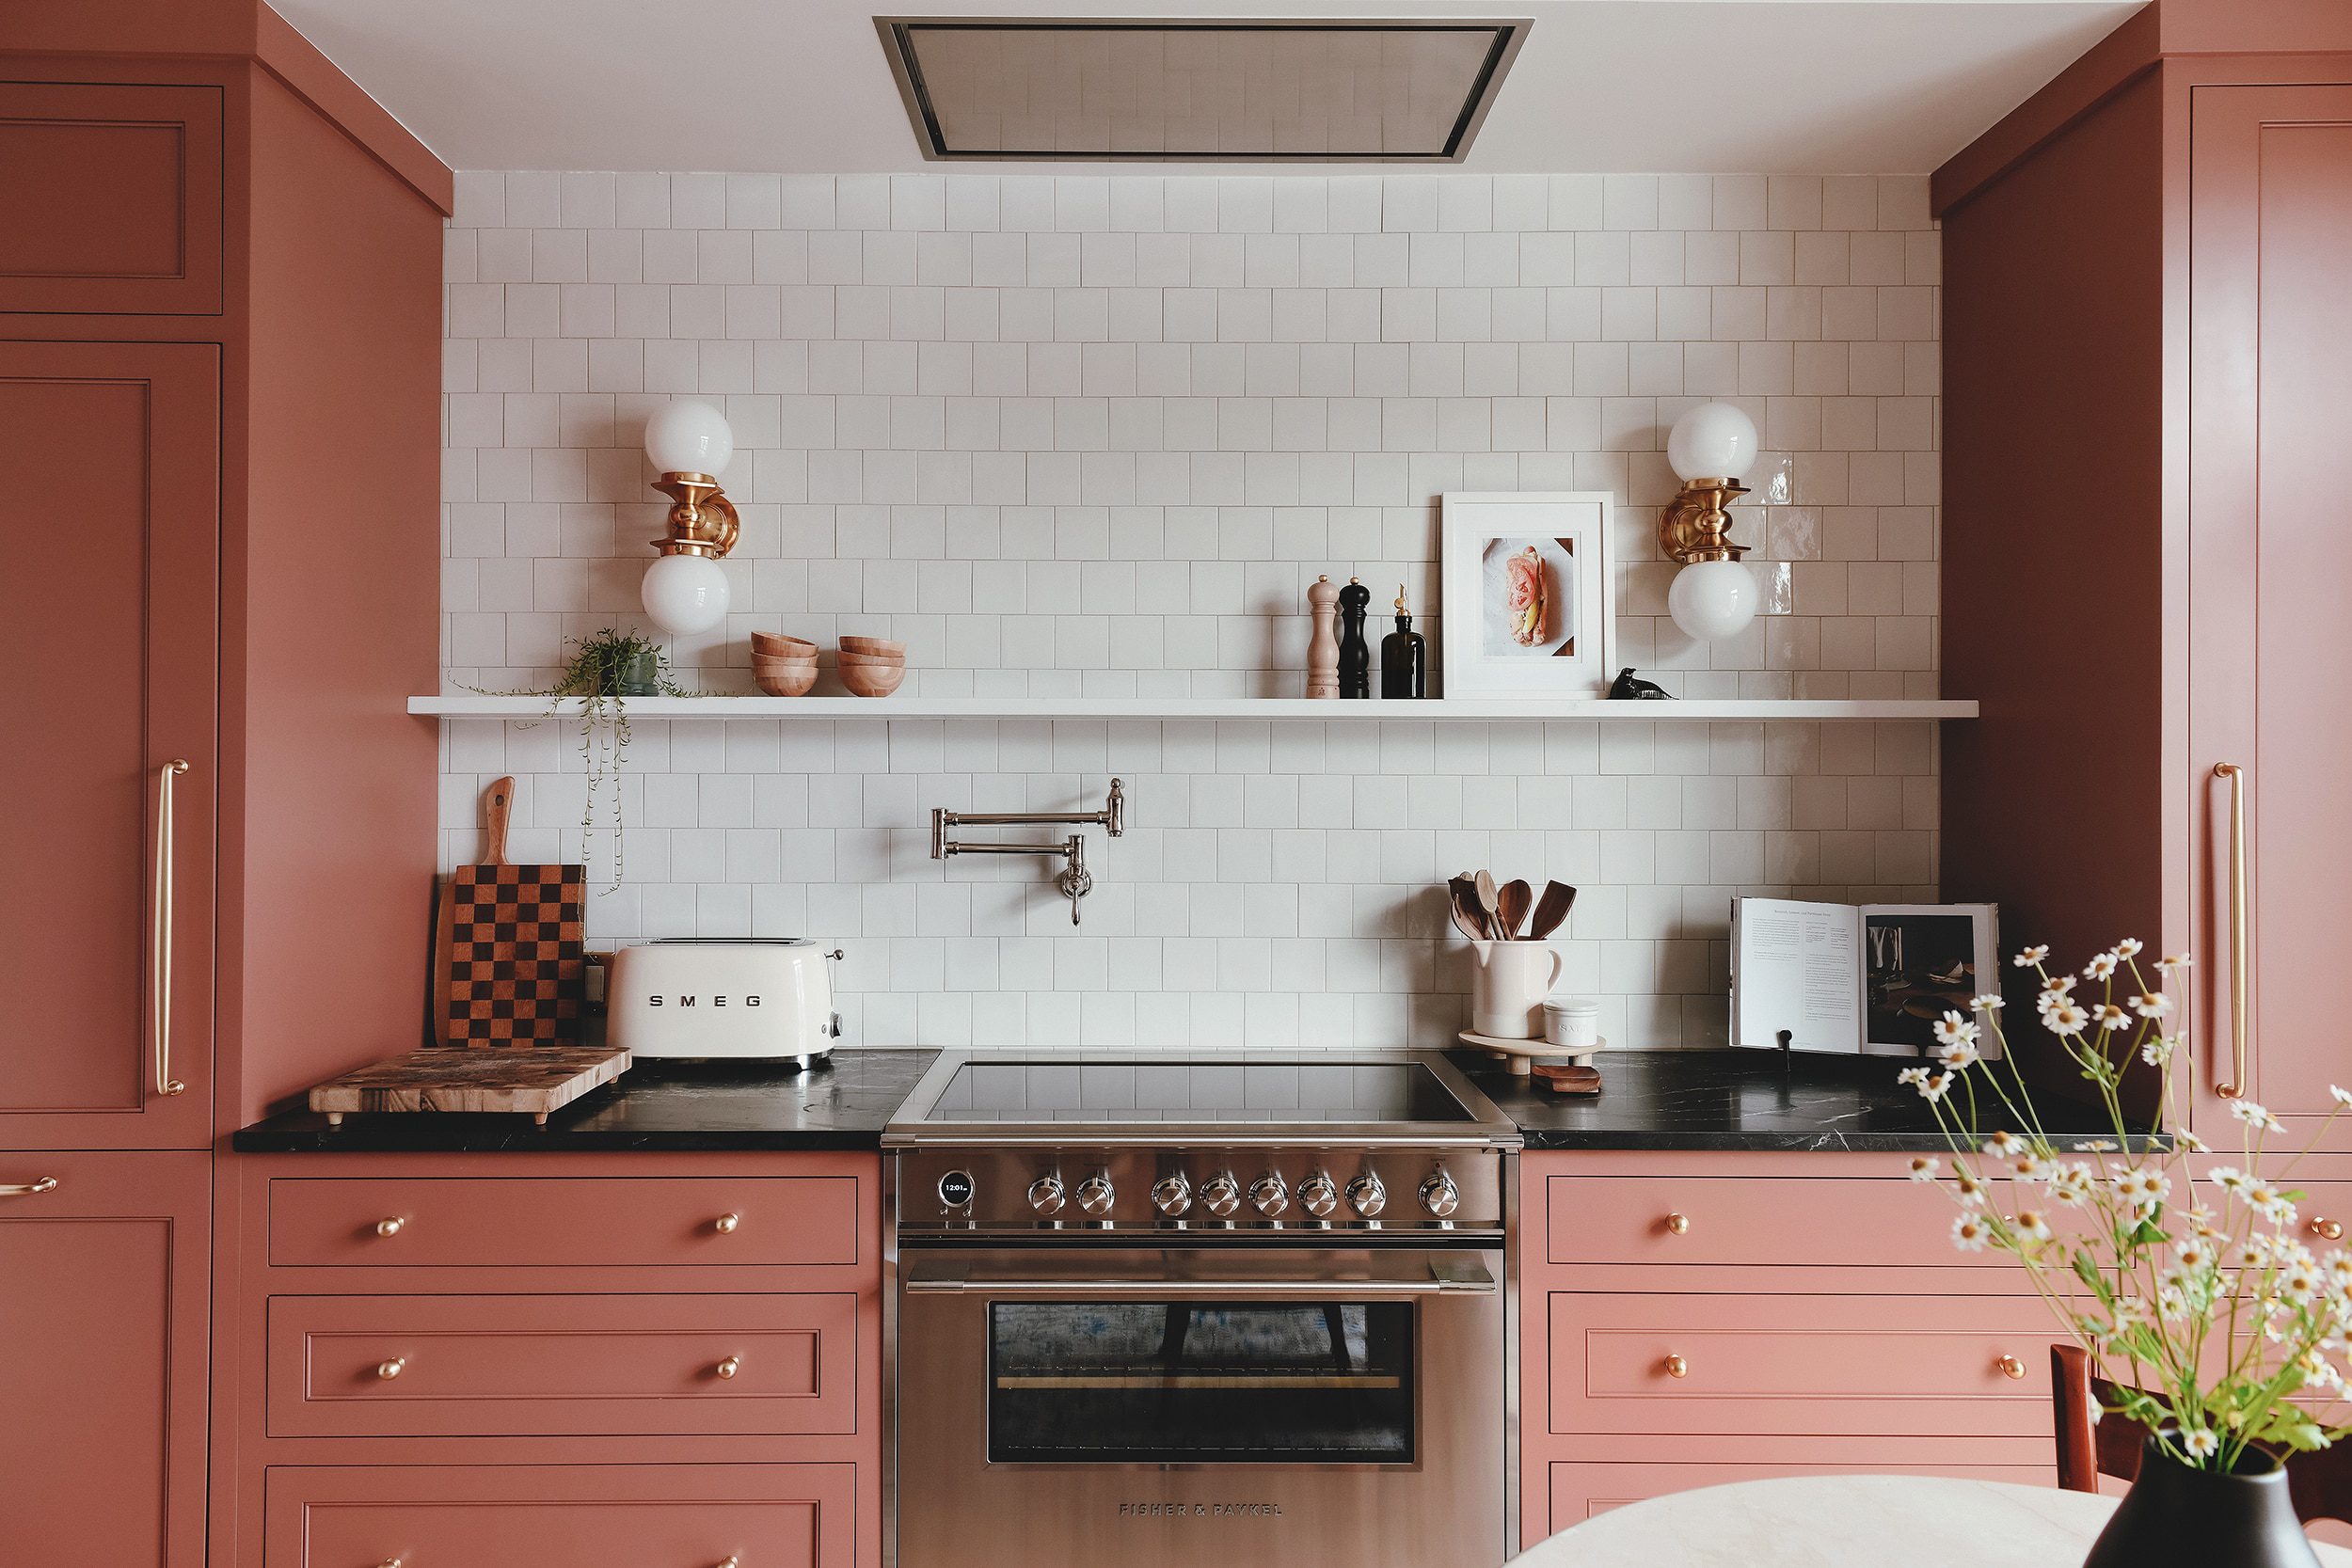 The range wall in our newly renovated kitchen featuring an induction range, colorful cabinets and a ceiling-mounted range hood // via Yellow Brick Home